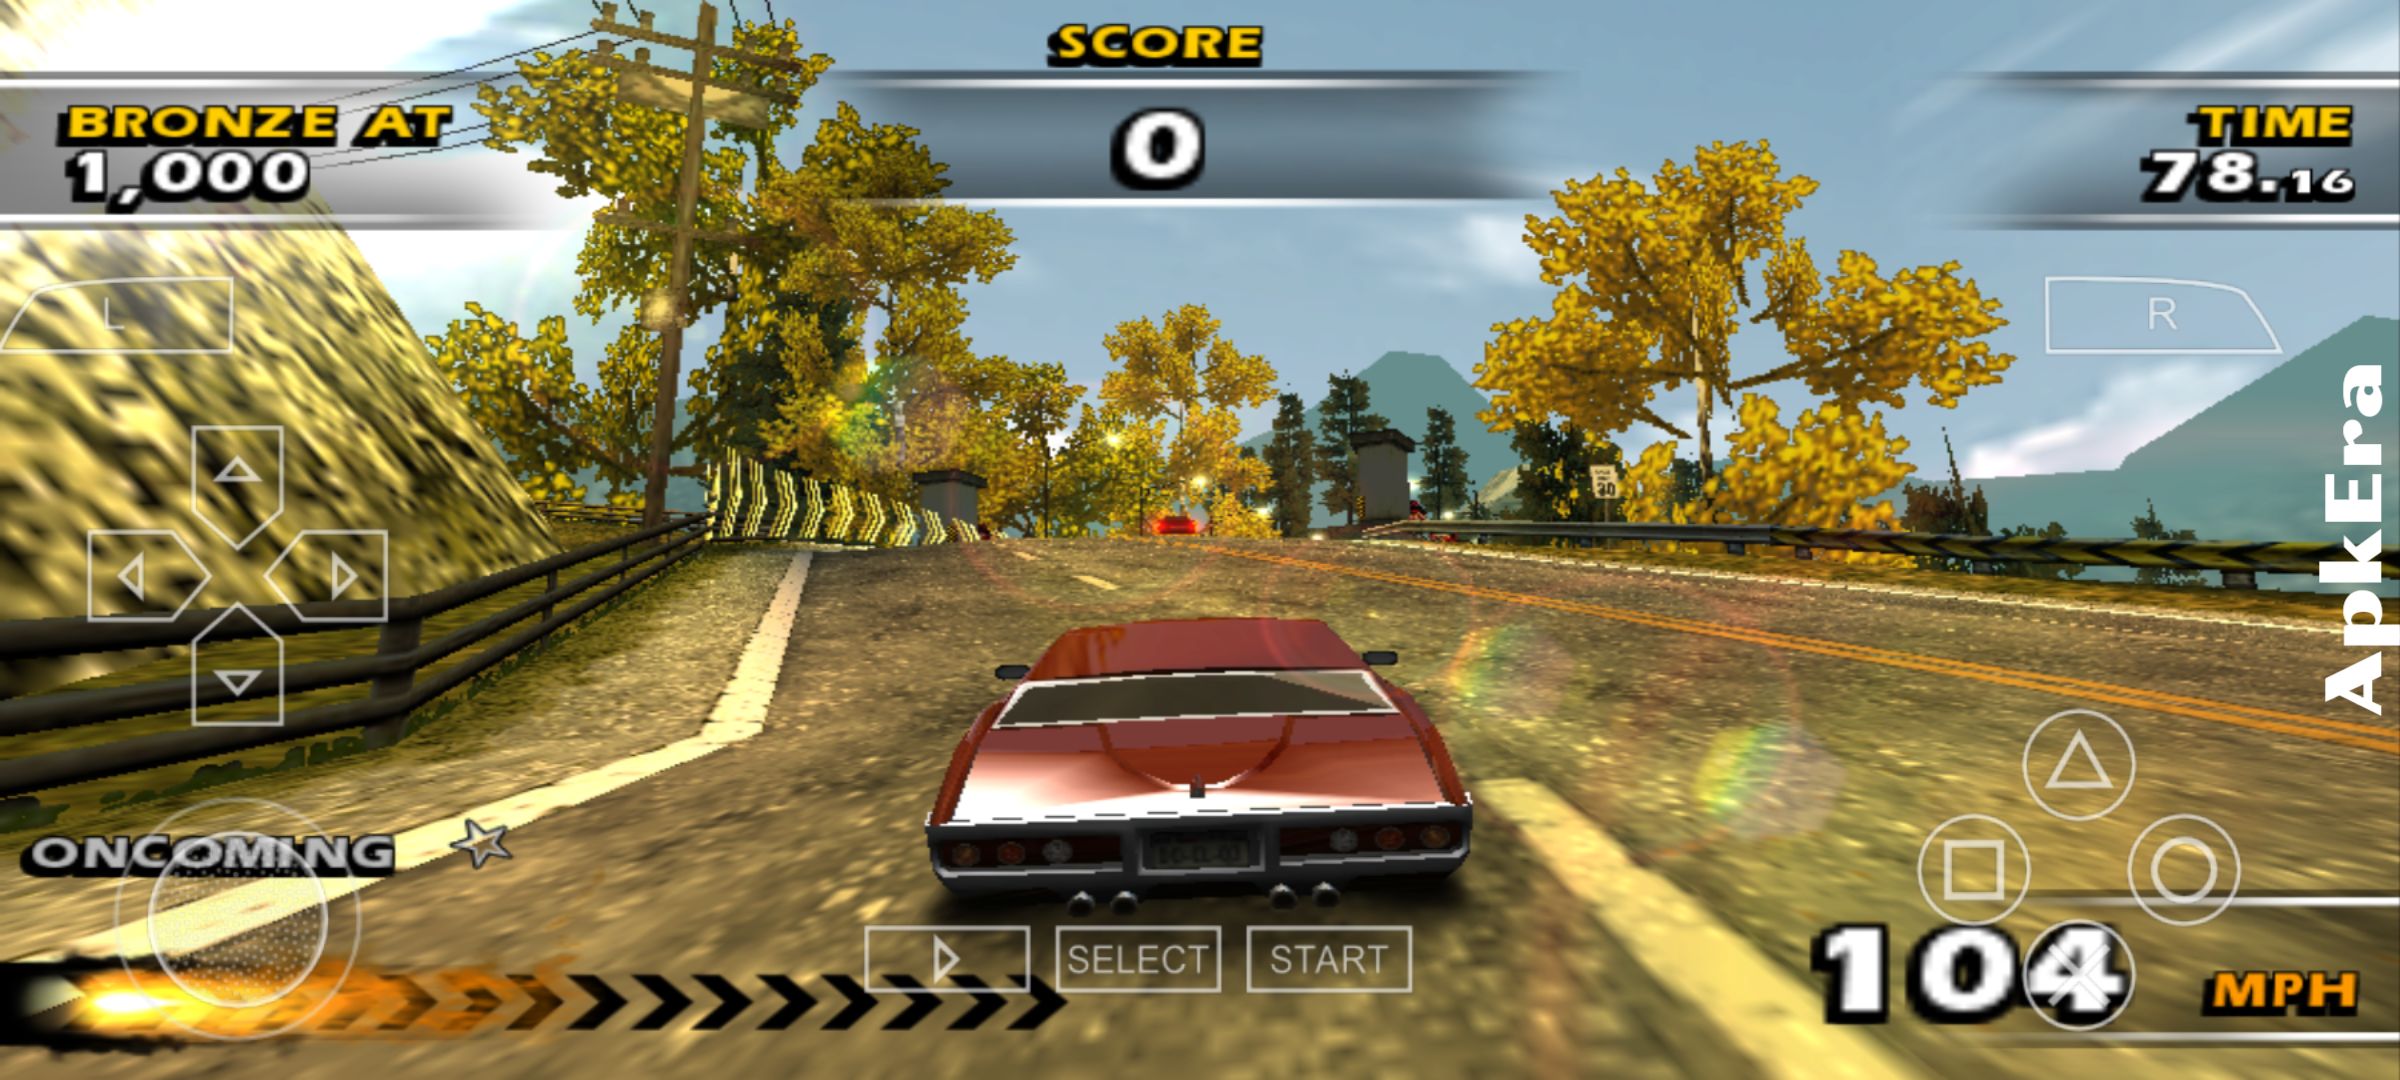 10+ Best PPSSPP Racing Games for Android